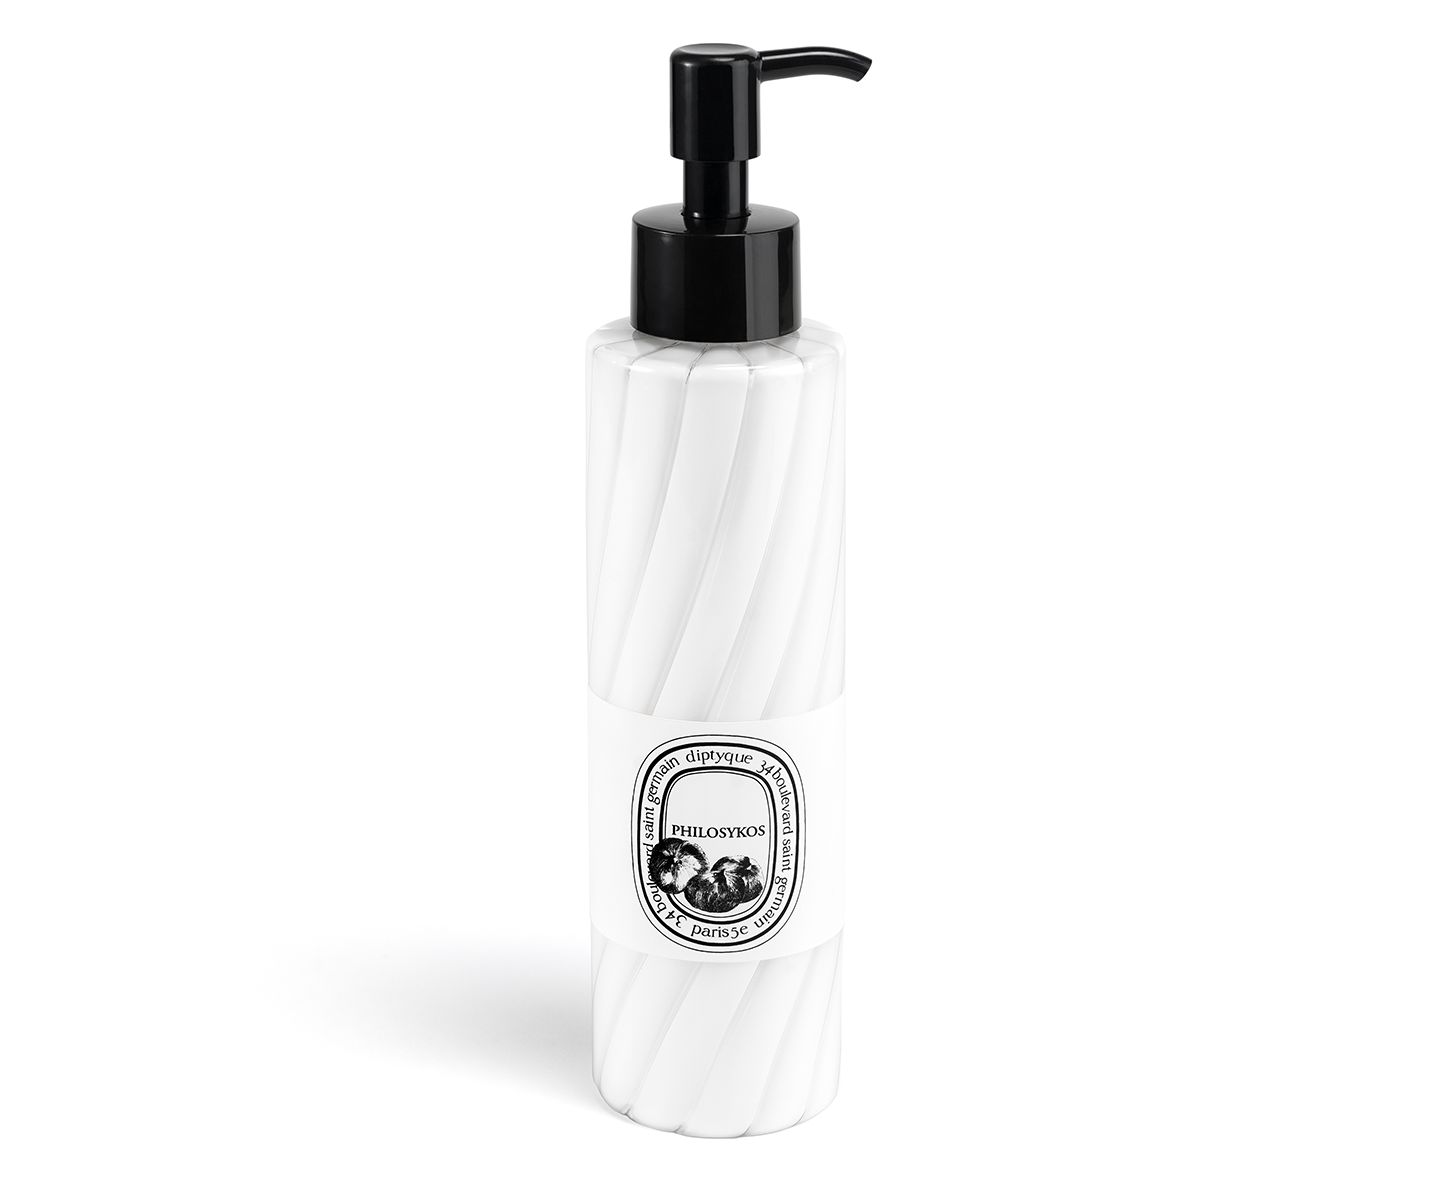 Philosykos Hand and Body Lotion | Diptyque (UK)